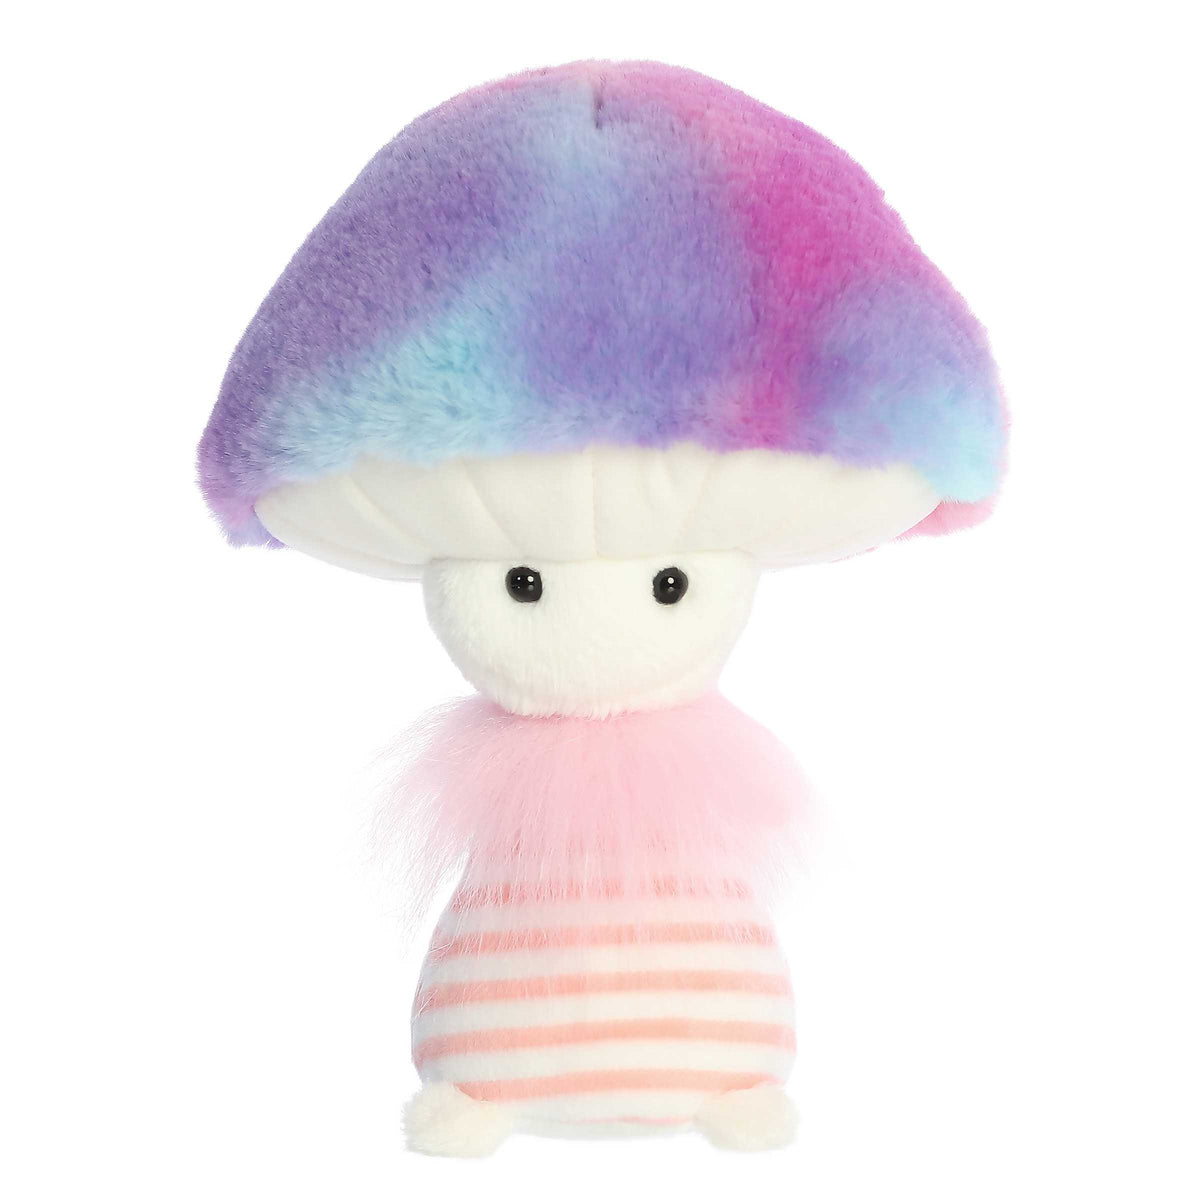 Cotton Candy mushroom plush from Fungi Friends, with pastel swirls and candy-striped details!